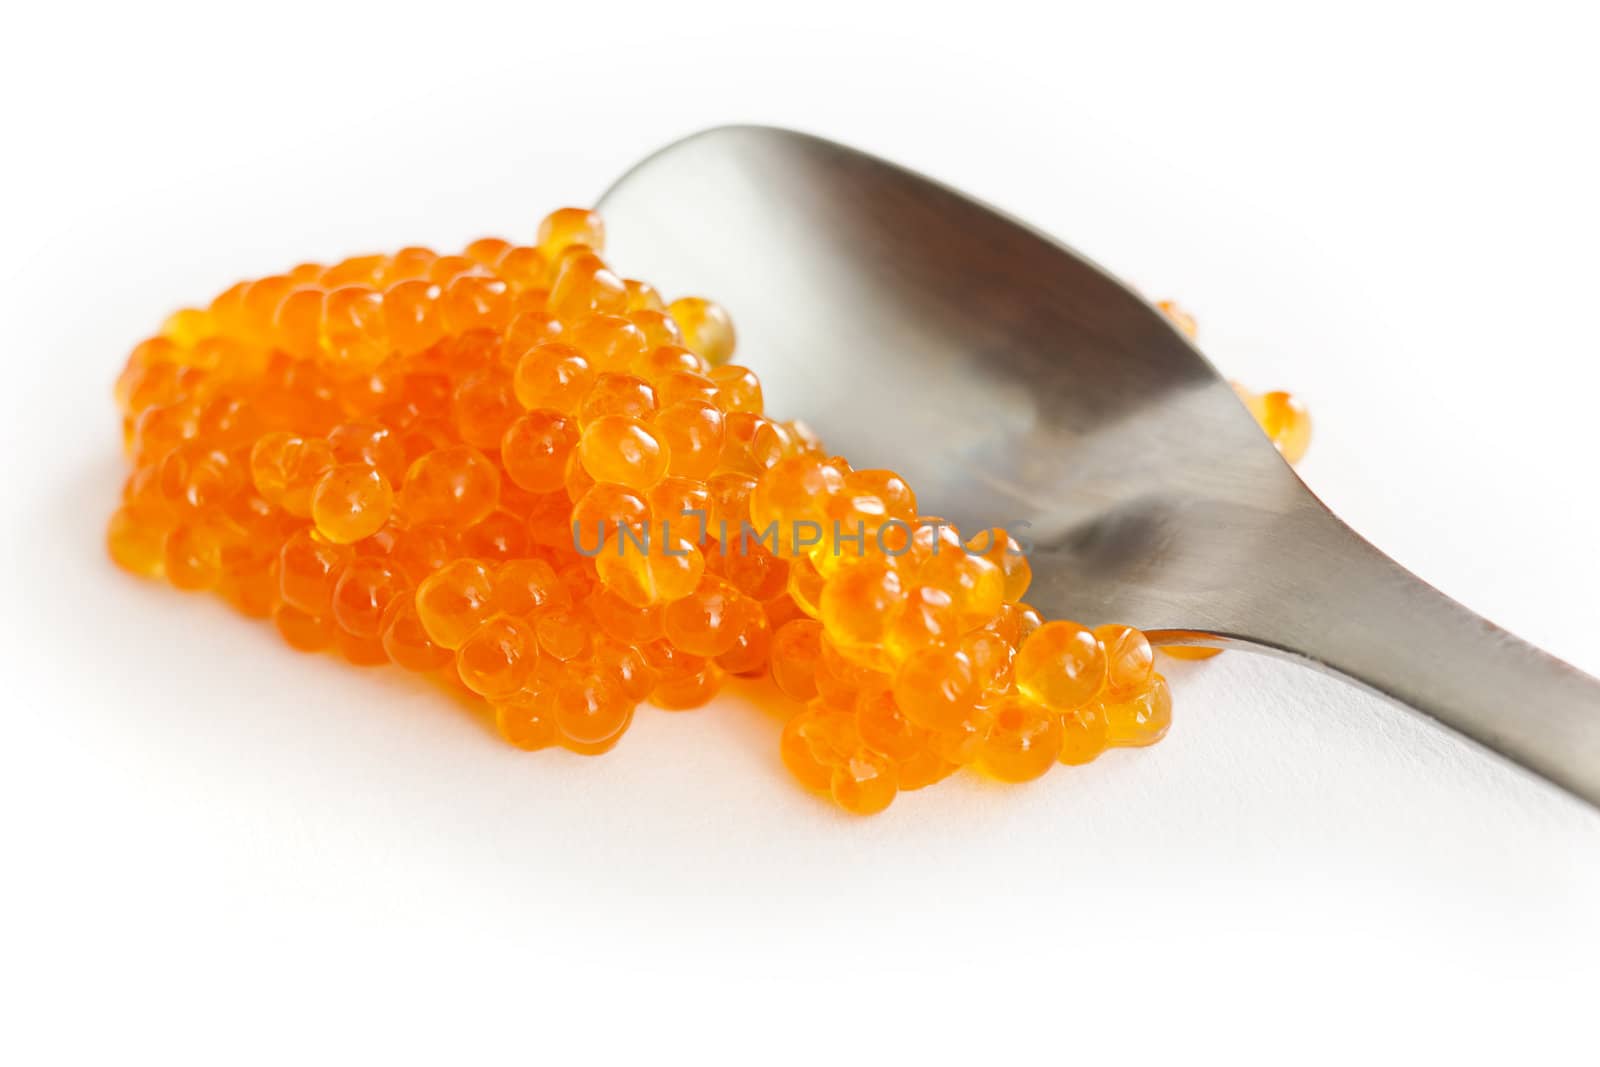 Salmon roe close up over white background